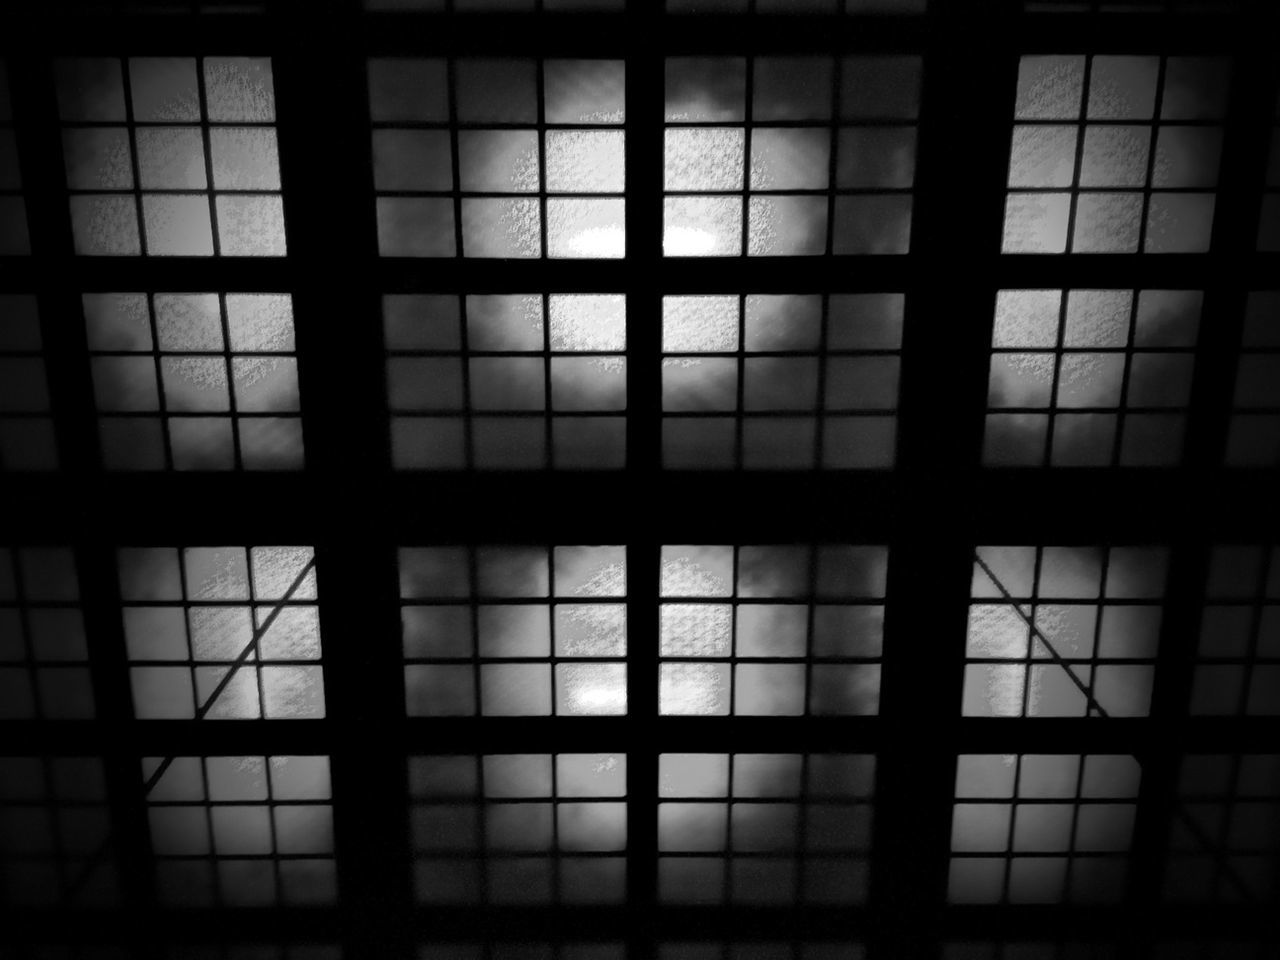 Silhouette of ceiling with windows